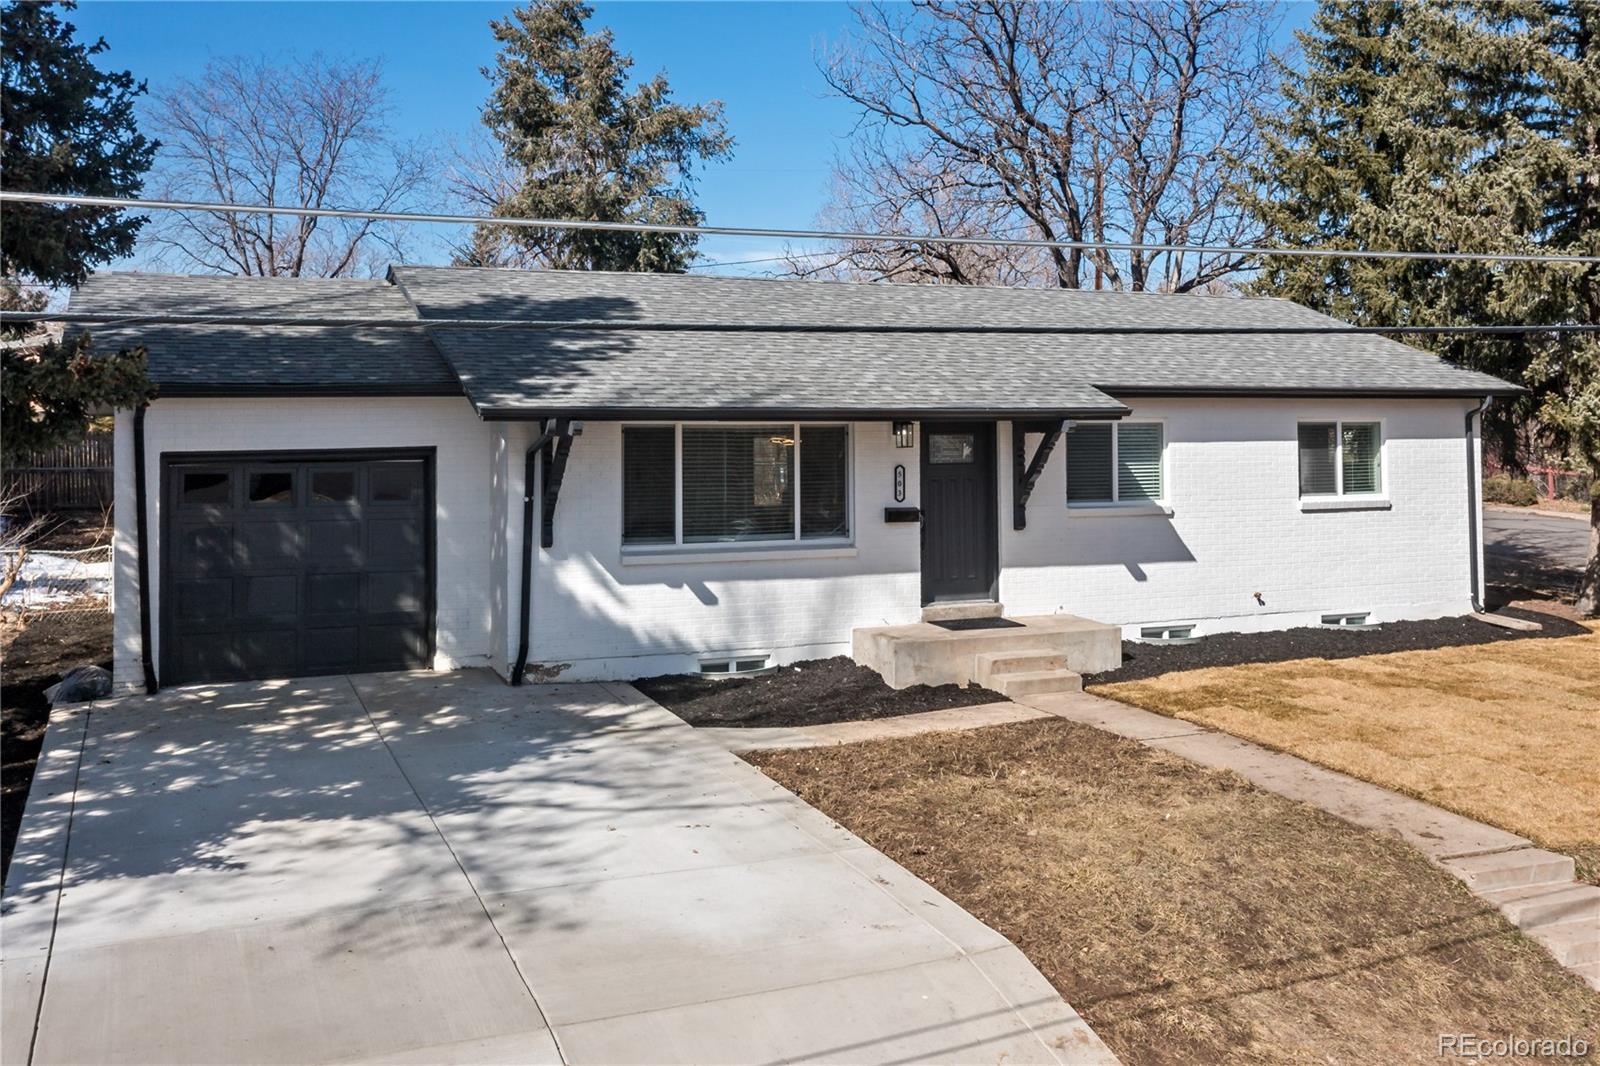 Report Image for 503 S Union Boulevard,Lakewood, Colorado